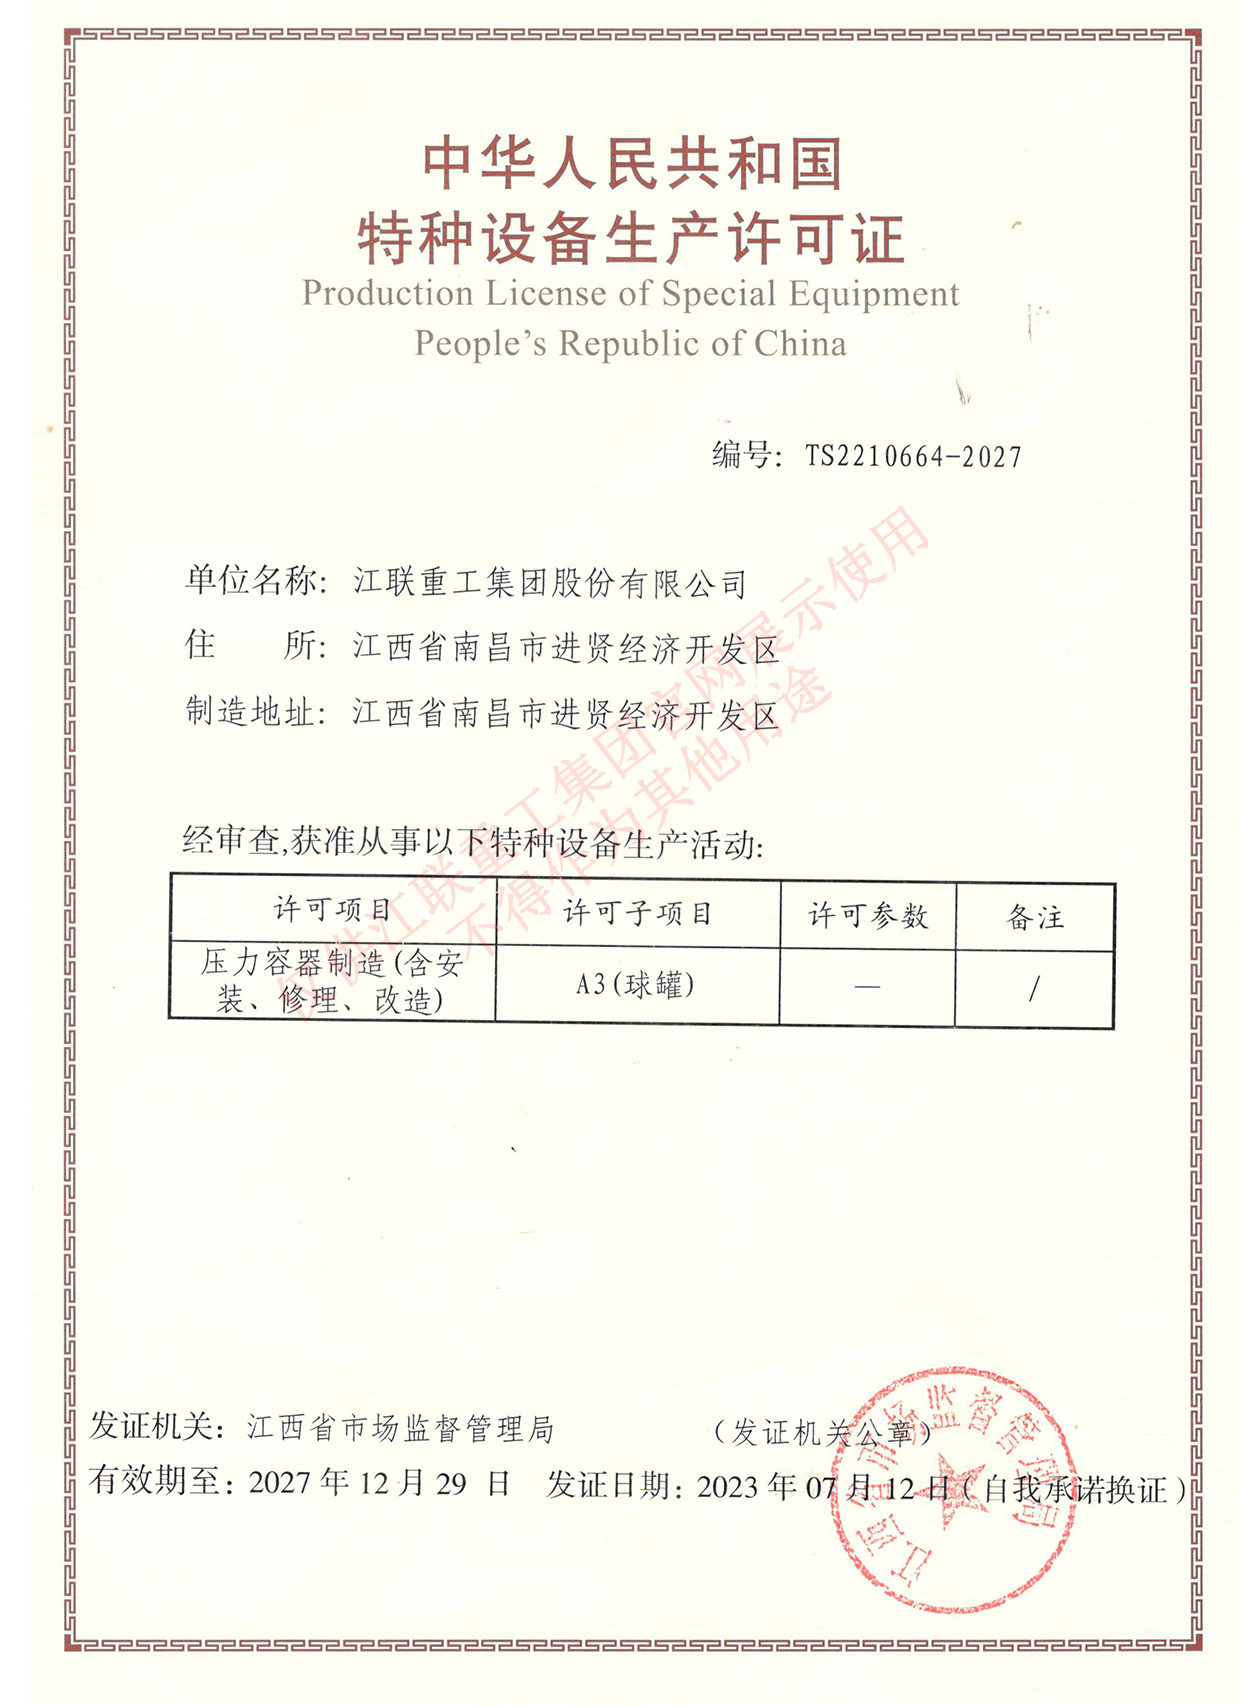 Container Manufacturing Certificate - Spherical Tanks